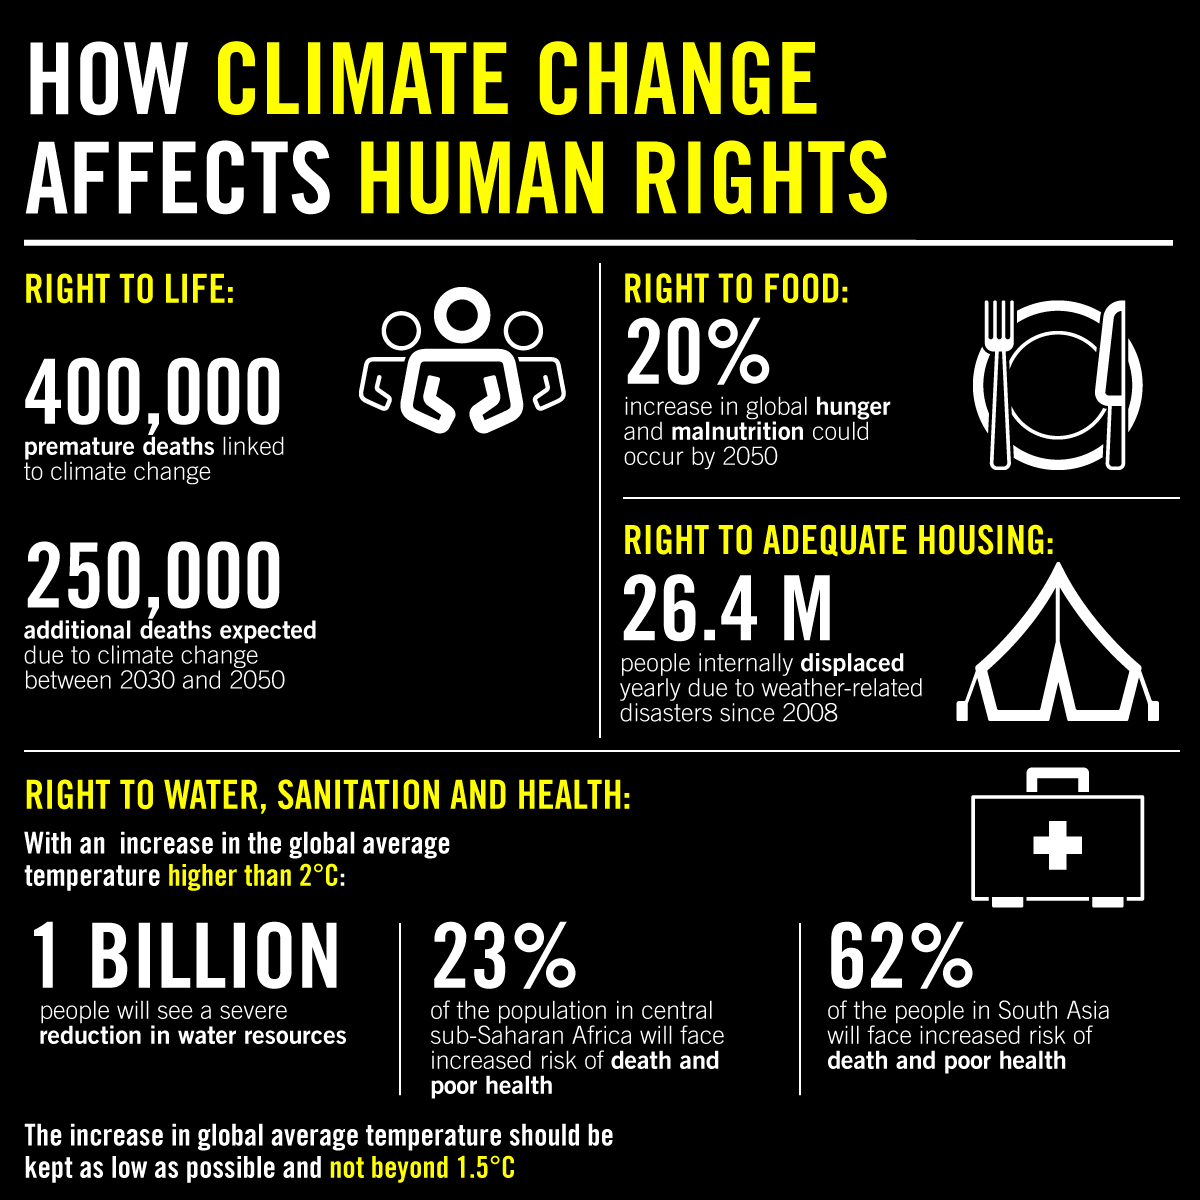 Right to life: climate change threatens our existence on this planet. We’ve all noticed extreme weather events, such as the 2013 Heatwave in Europe that claimed 35,000 live The World Health Organization predicts climate change will cause 250,000 deaths per year from 2030–2050, due to malaria, malnutrition, diarrhoea and heat stress. Right to health: people living in poorer countries will experience undernutrition more and more, due to less food production. They will also experience more disease. Children exposed to the natural disasters caused by climate change may suffer from post-traumatic stress disorders as a direct result.  Right to housing: increases in extreme weather create a higher likelihood of housing loss to events like floods and wildfires. Many people are already displaced internationally from such events. Issues such as Drought, erosion and flooding will also impact our physical environments as sea-level rise.  Water and sanitation: increases in melting snow and ice, higher temperatures, rising sea levels, and lessening rainfall show the affects of climate change on water sources. More than one billion people do not have access to clean water; this number will increase as climate change continues. Extreme weather events like cyclones and floods affect water and sanitation systems and leave behind contaminated water, which causes disease to spread. Sewage systems in urban areas will also be affected. 